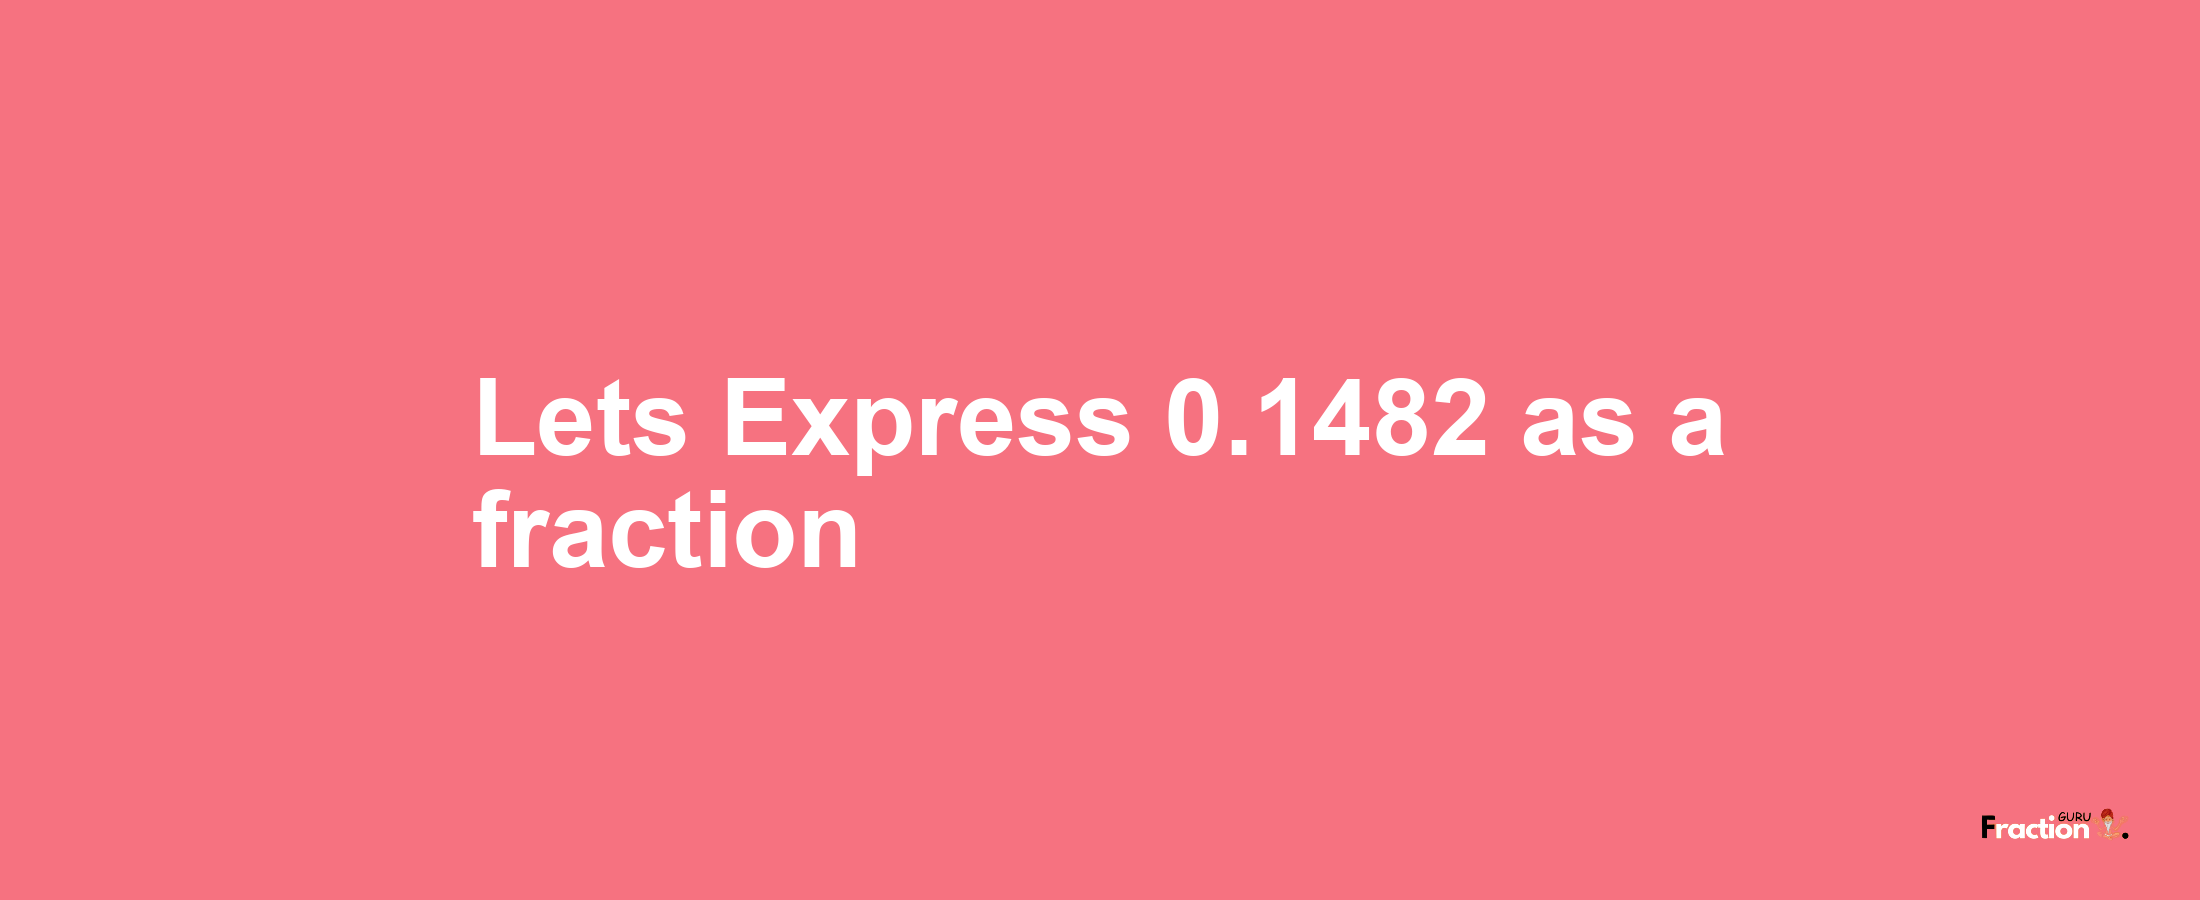 Lets Express 0.1482 as afraction